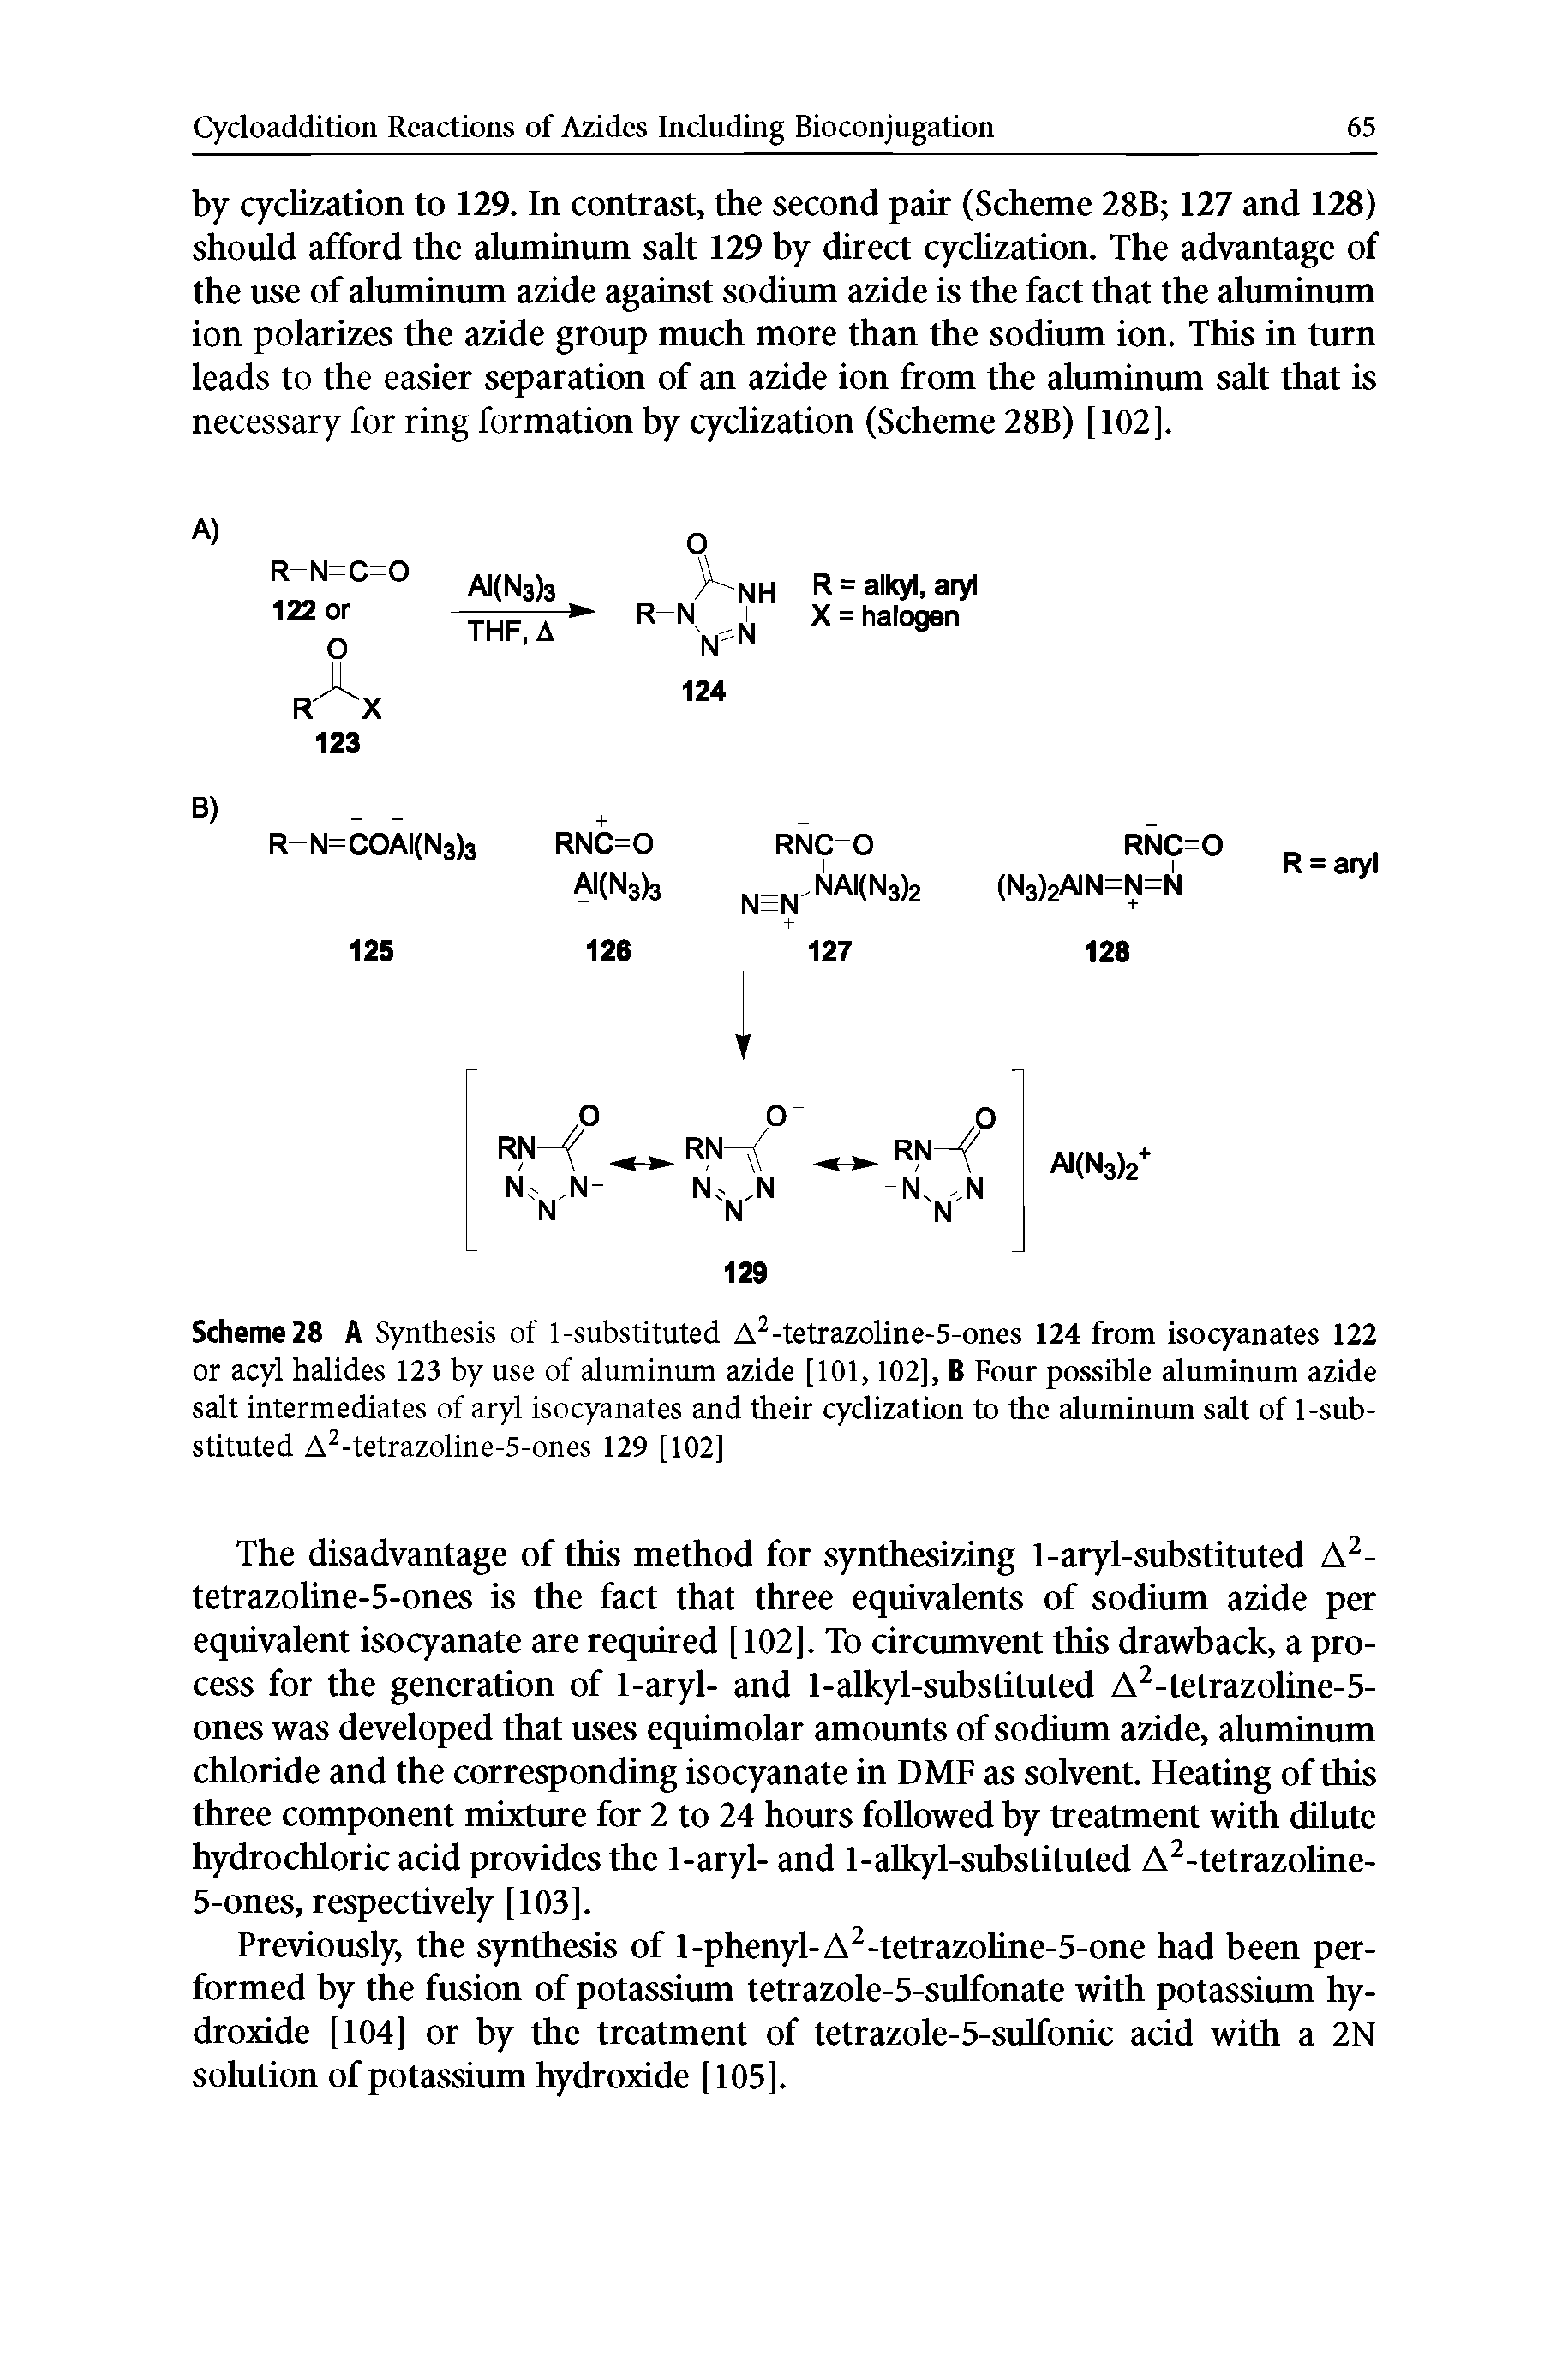 Scheme 28 A Synthesis of 1-substituted A -tetrazoiine-5-ones 124 from isocyanates 122 or acyi halides 123 by use of aluminum azide [101,102], B Four possible aluminum azide salt intermediates of aryl isocyanates and their cyclization to the alumimun salt of 1-substituted A -tetrazoline-5-ones 129 [102]...